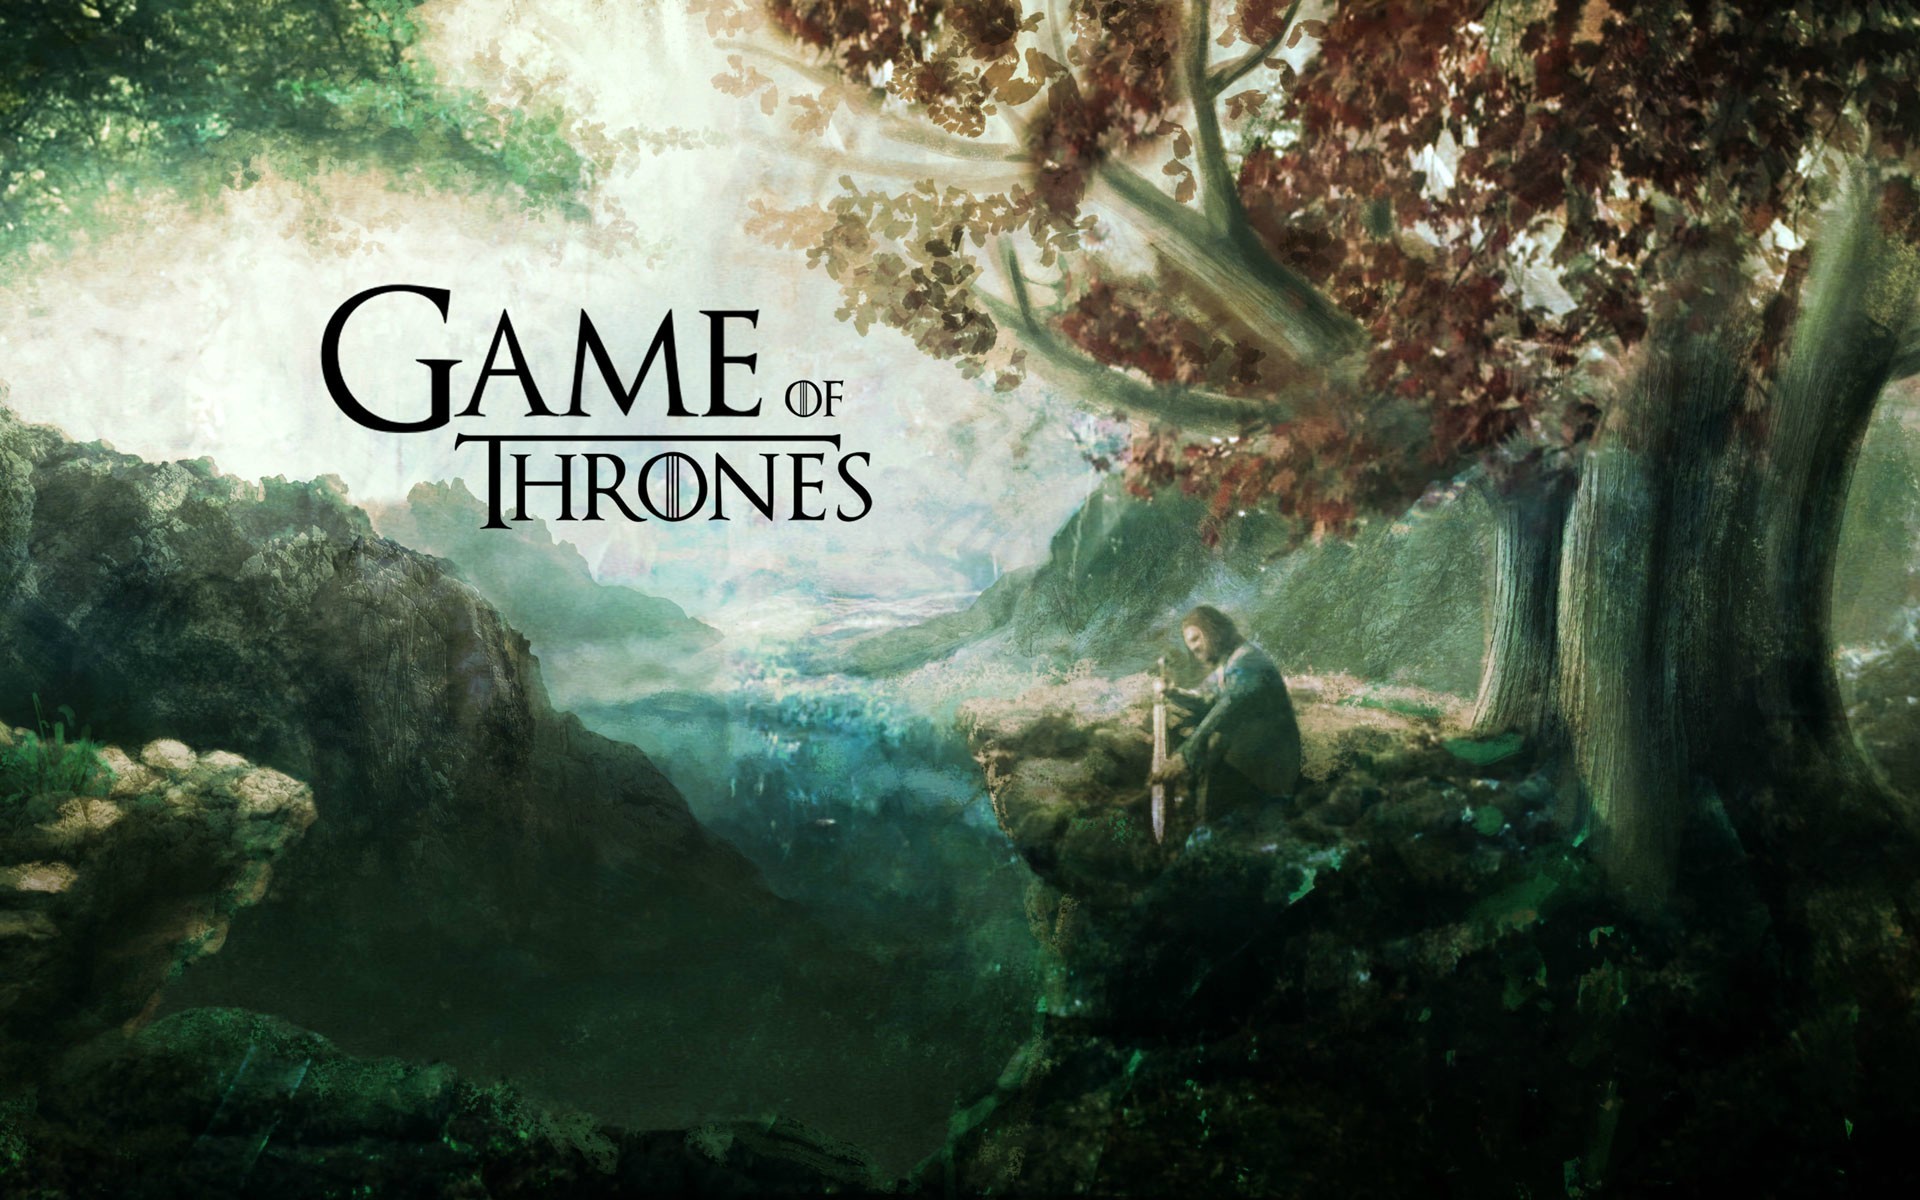 Game of thrones poster